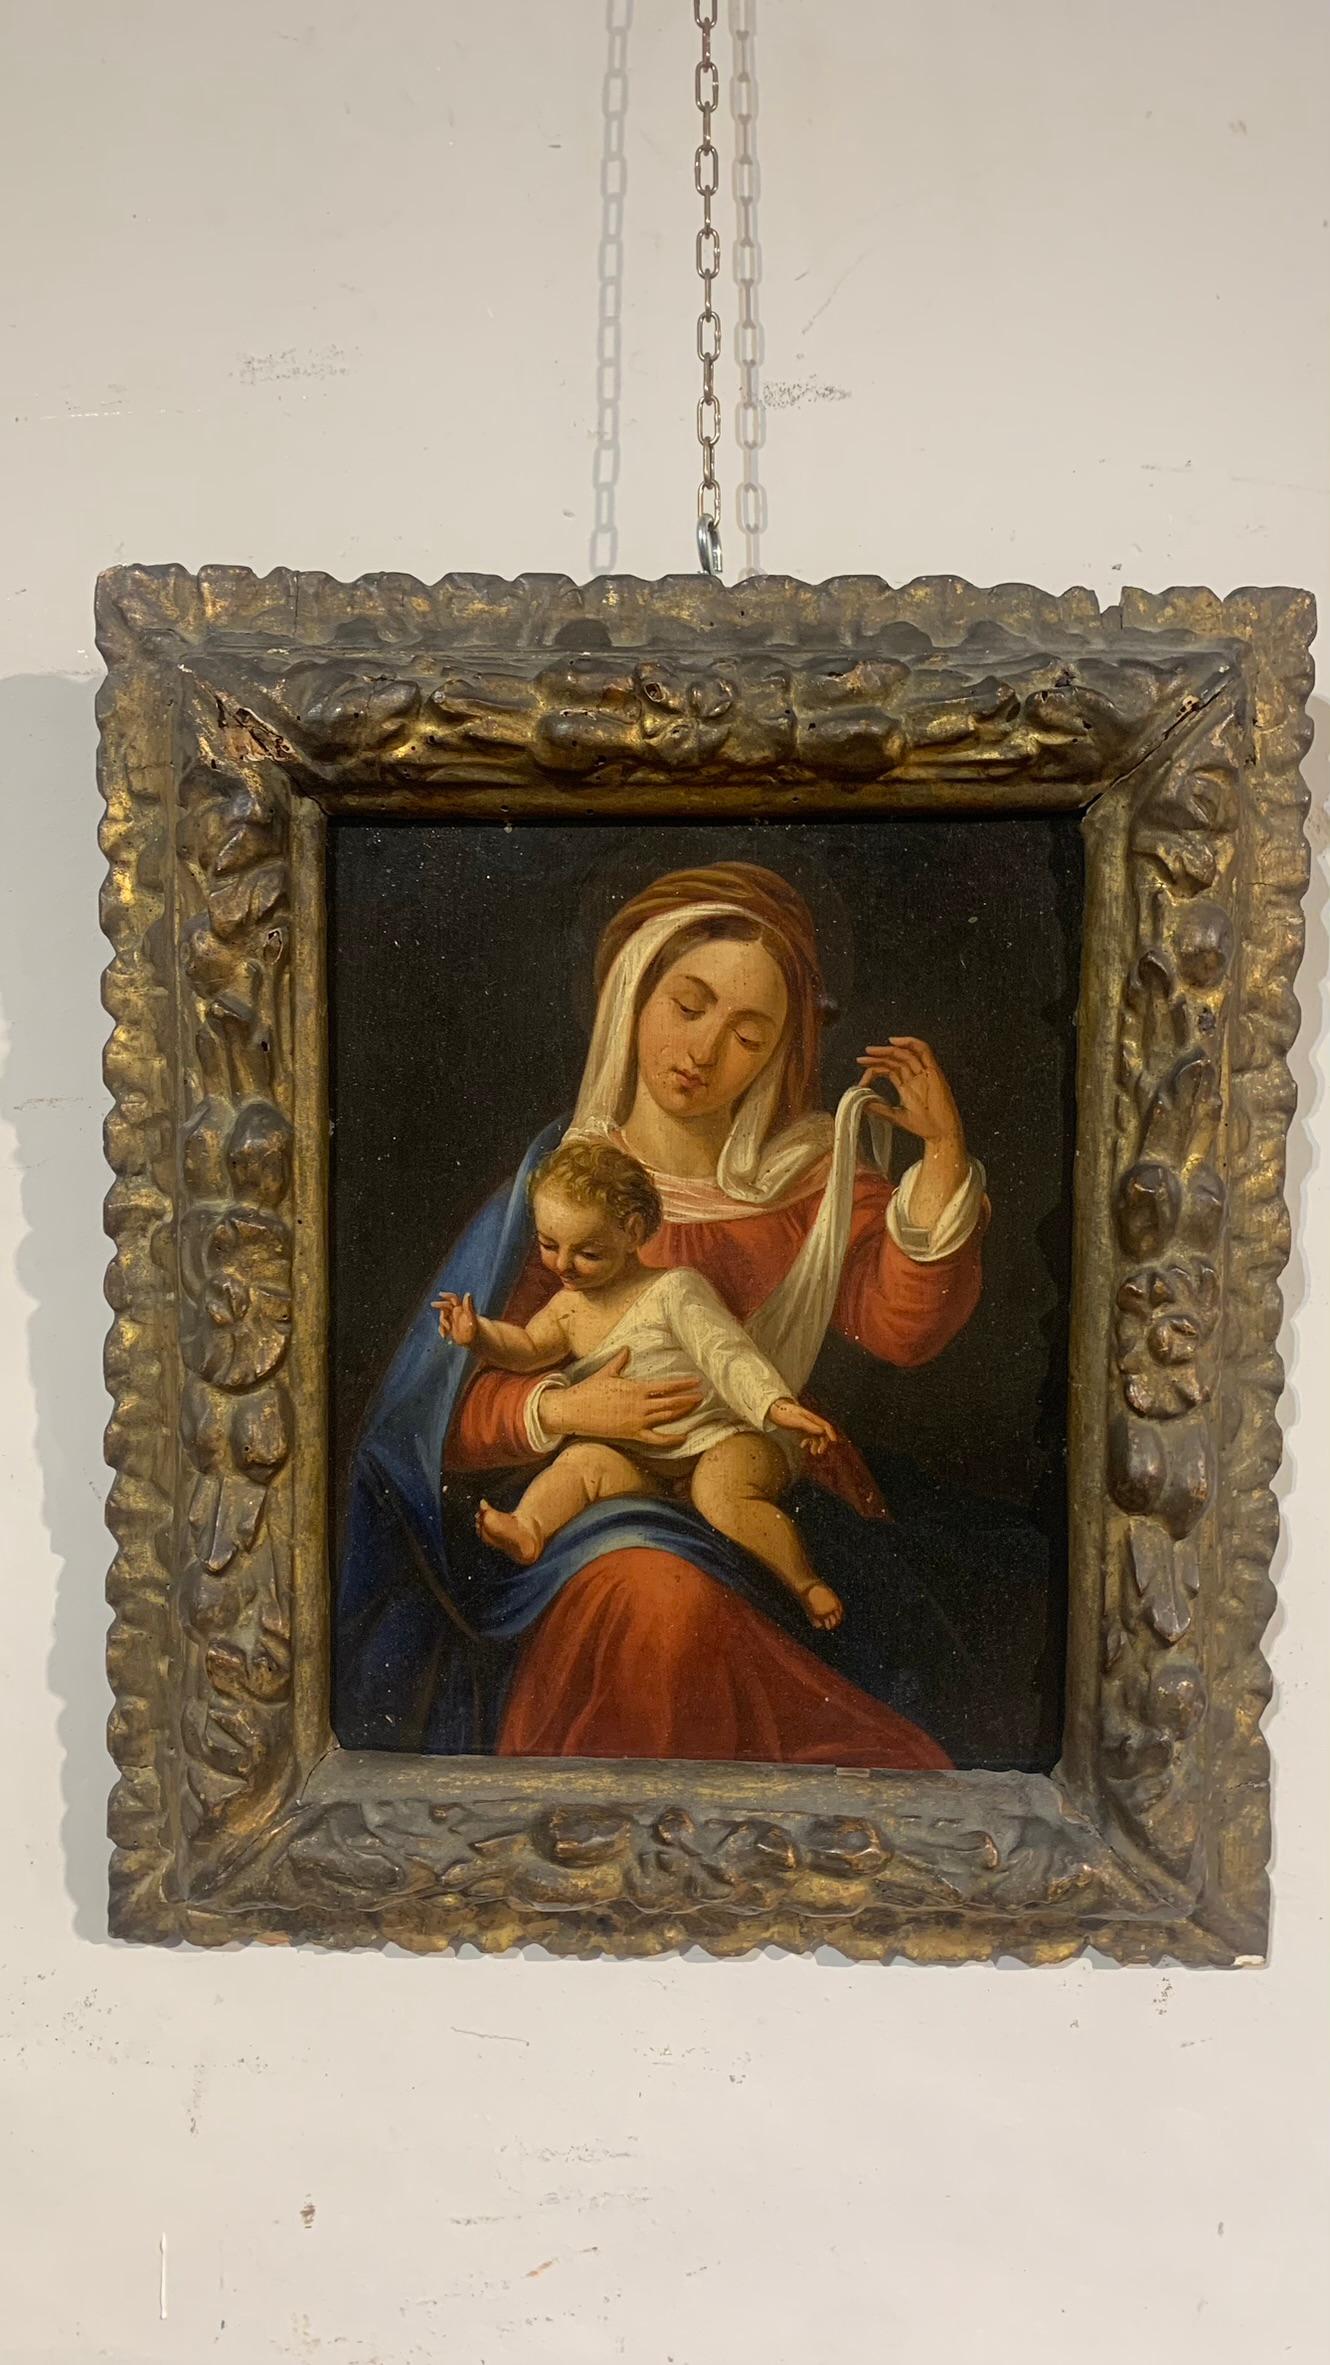 Beautiful oil painting on panel depicting the Madonna with Child in a carved and gilded wooden frame.
Work of a Piedmontese artist from the early 1700s.

MEASURES: Light 28x22 cm, Overall 43x36 cm.